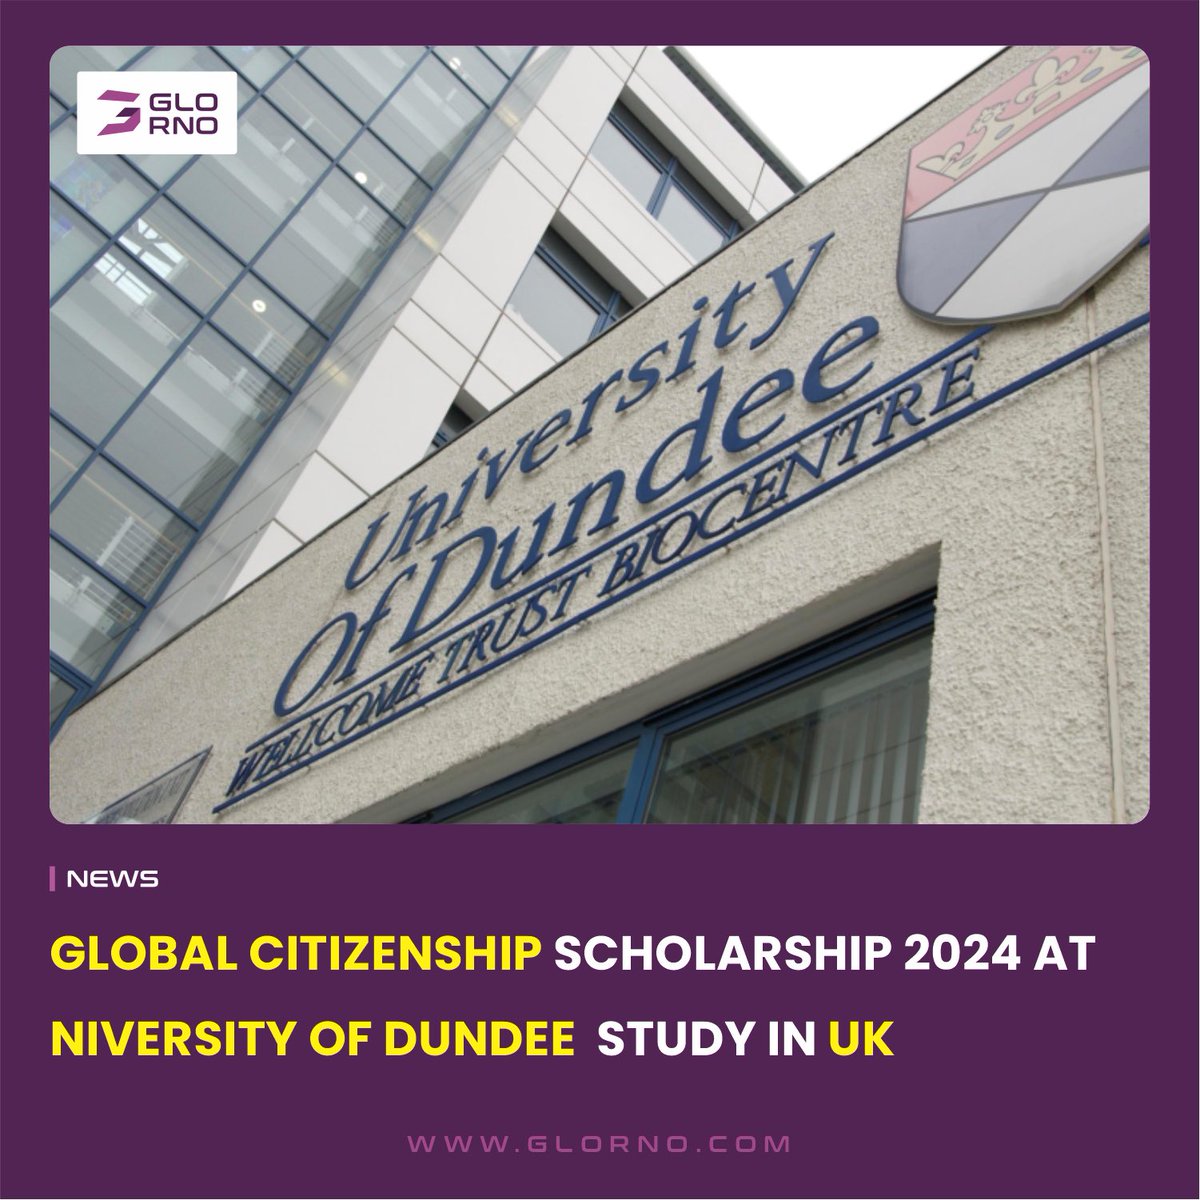 🌍 Unlock your potential with the Global Citizenship Scholarship 2024 at the University of Dundee in the UK! Embrace the opportunity to study in the UK and become a global citizen. Stay tuned for application details. glorno.com/index.php/2024…

#GlobalCitizenship #StudyinUK 🇬🇧🎓